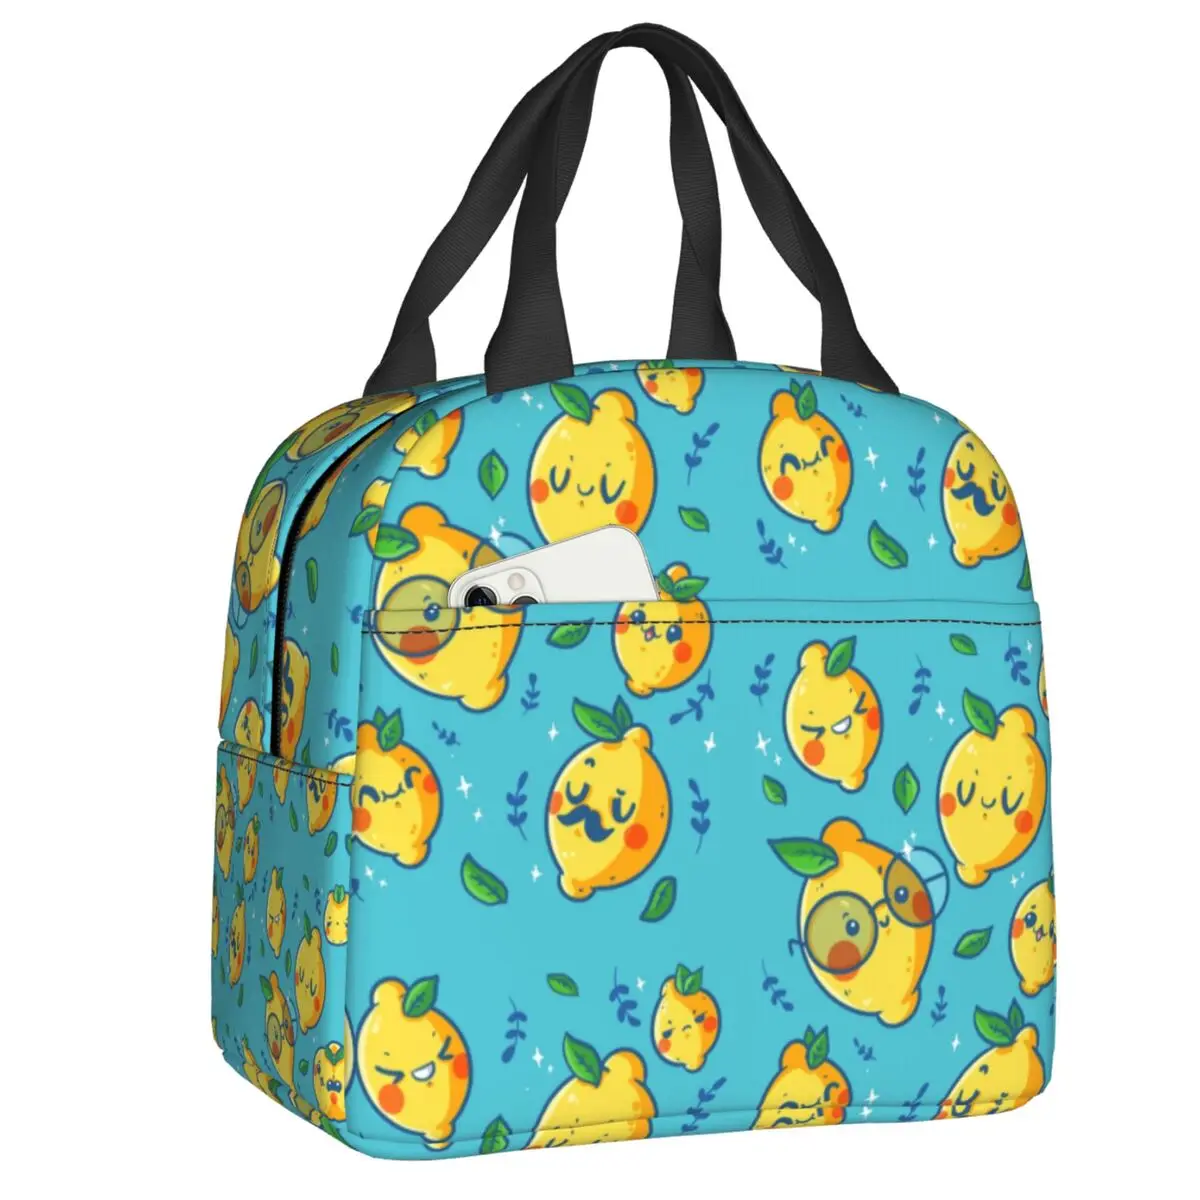 Funny Lemon Faces Insulated Lunch Tote Bag for Women Summer Citrus Fruit Resuable Cooler Thermal Food Lunch Box School